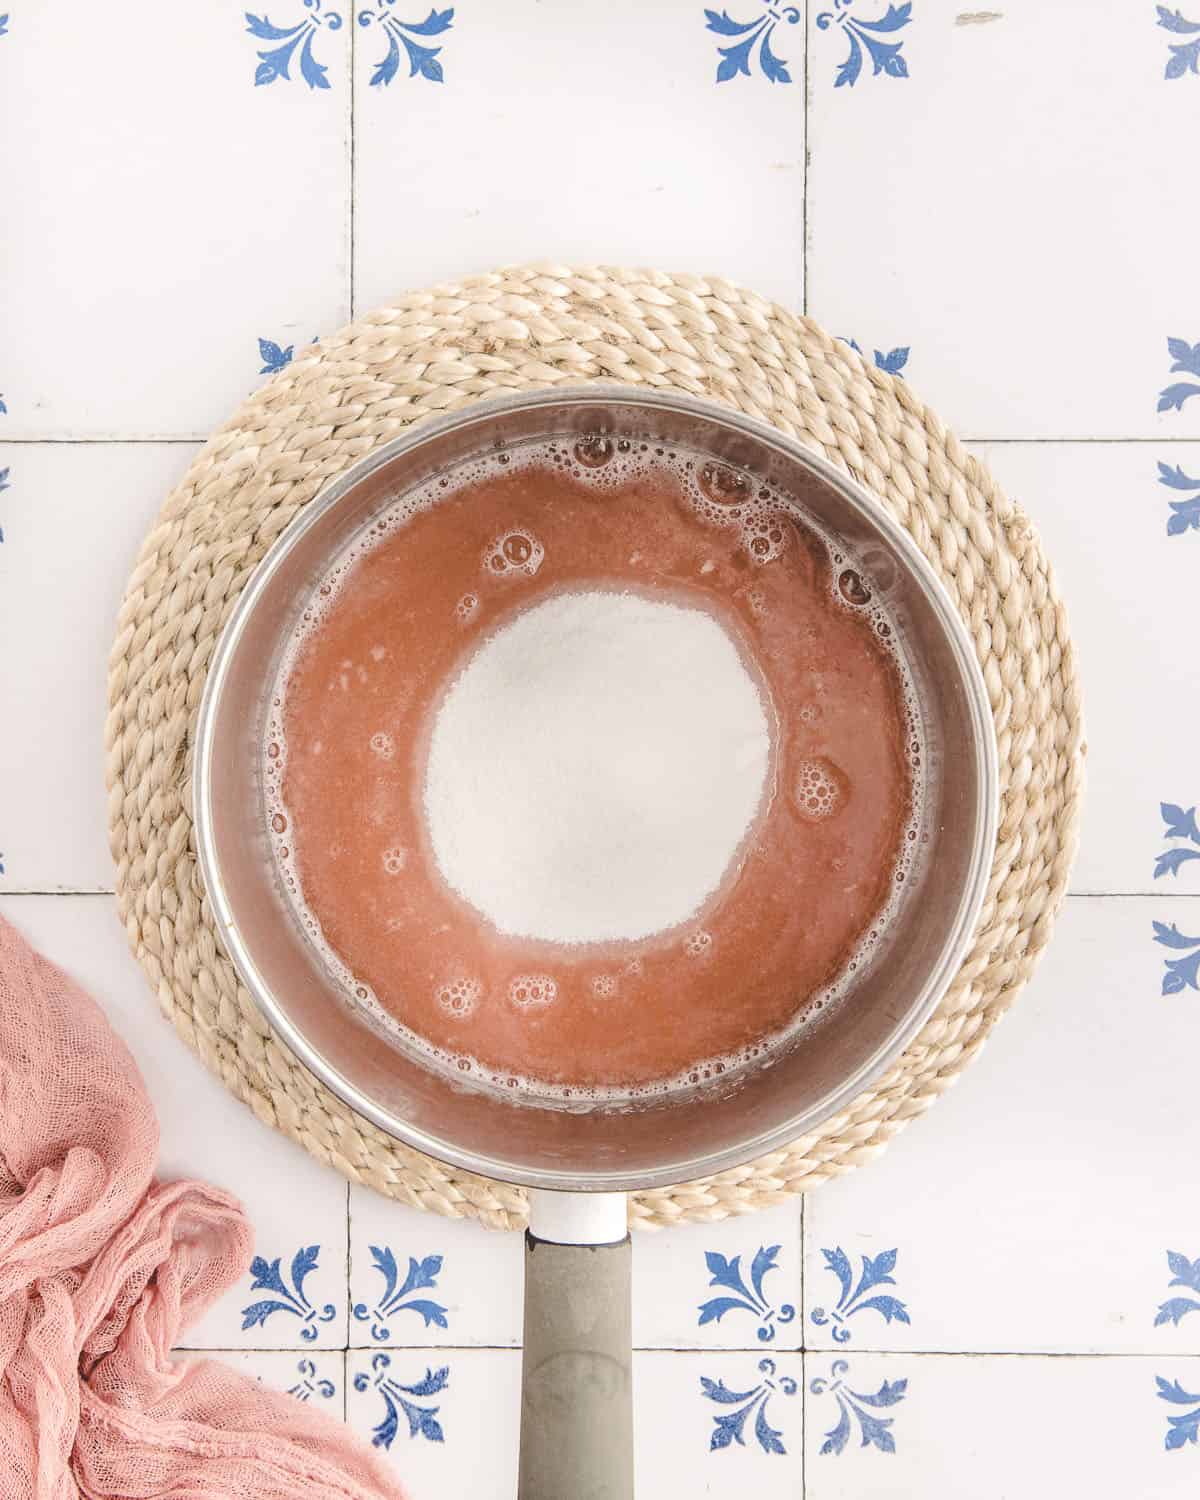 A pan of pink rhubarb syrup with white sugar in the middle ready to cook and dissolve. On a woven trivet on a white surface with blue designs. 